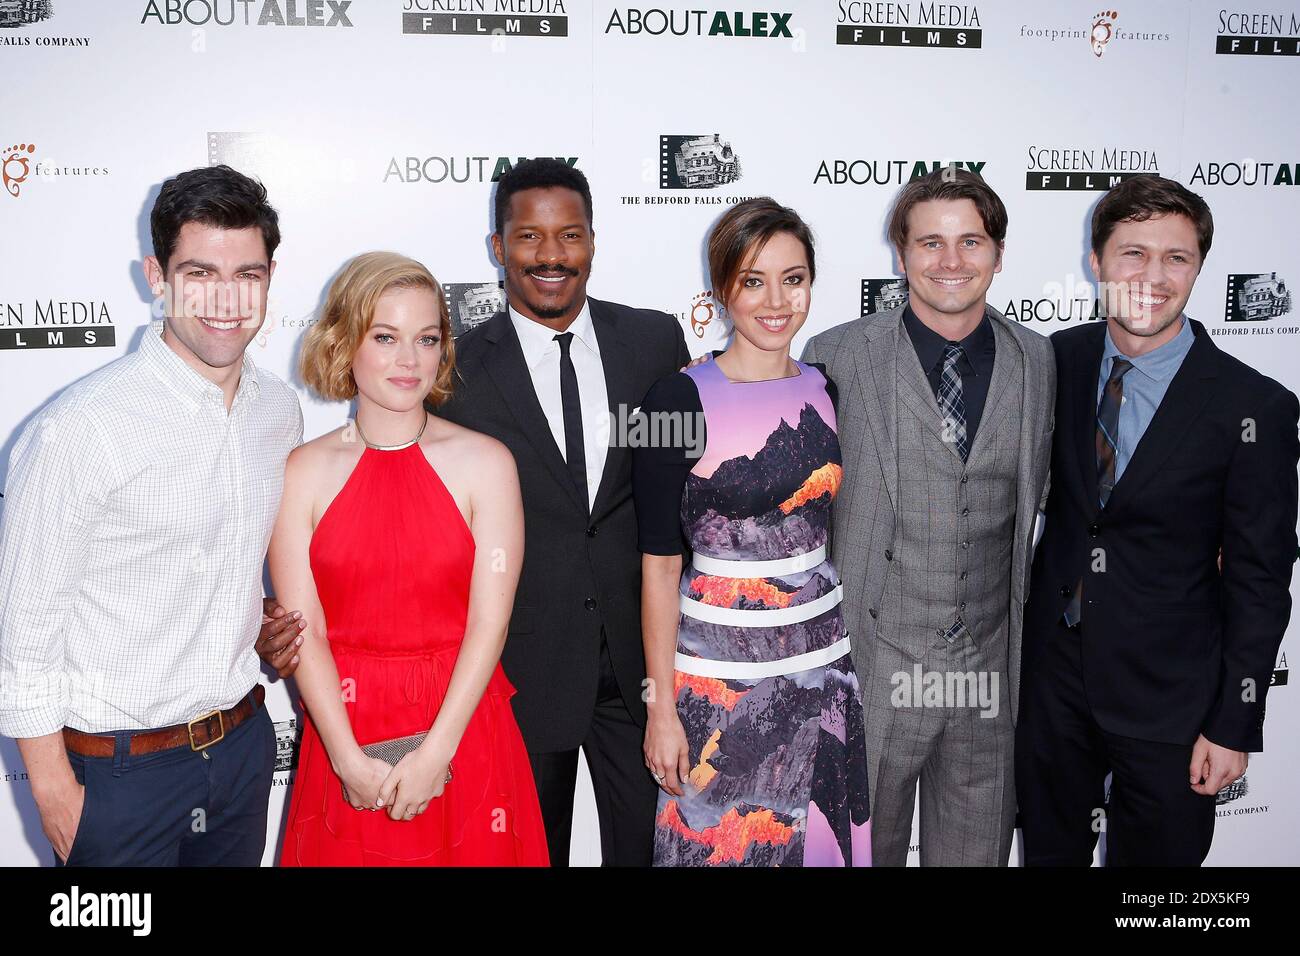 Max Greenfield, Jane Levy, Nate Parker, Aubrey Plaza, Jason Ritter and director Jesse Zwick attend the premiere of About Alex at the ArcLight Hollywood, in Hollywood, Los Angeles, CA, USA, on August 6, 2014. Photo by Julian Da Costa/ABACAPRESS.COM Stock Photo